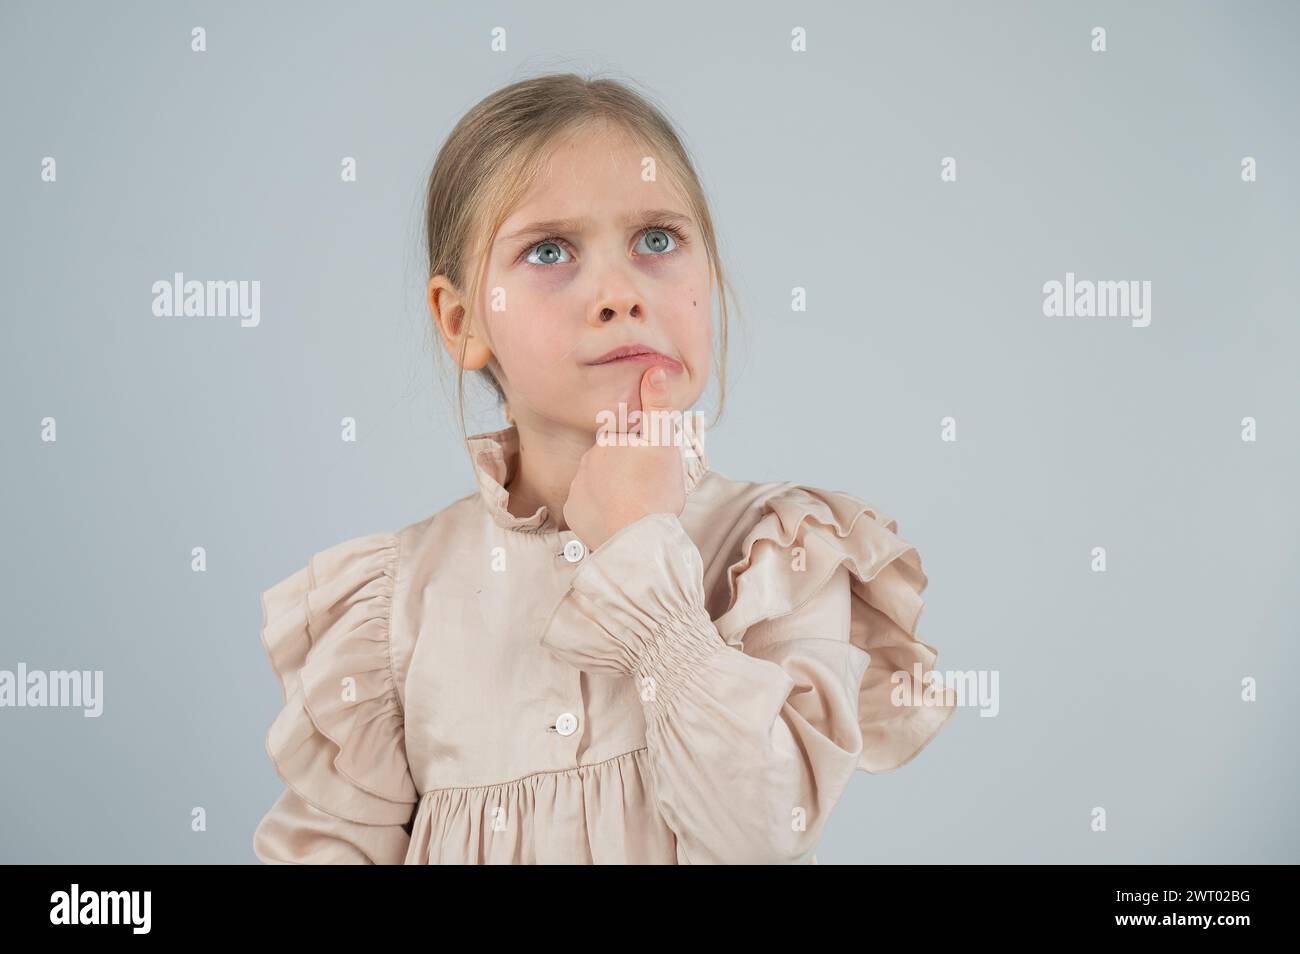 Portrait of a cute Caucasian pensive girl on a white background. Stock Photo